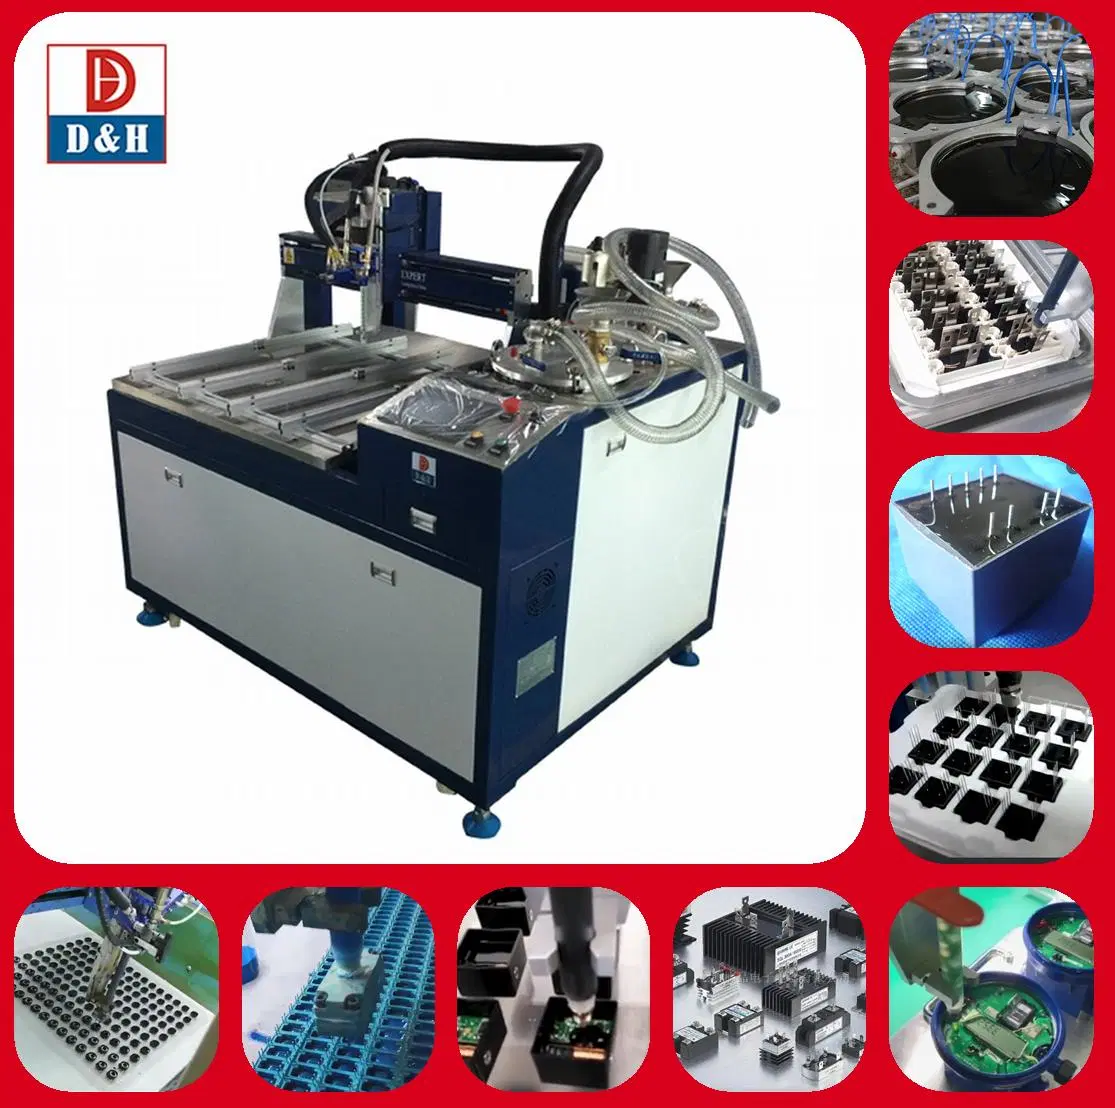 Automatic Glue Drop Machine Pouring System Ab Potting of Two Component Epoxies or Silicones